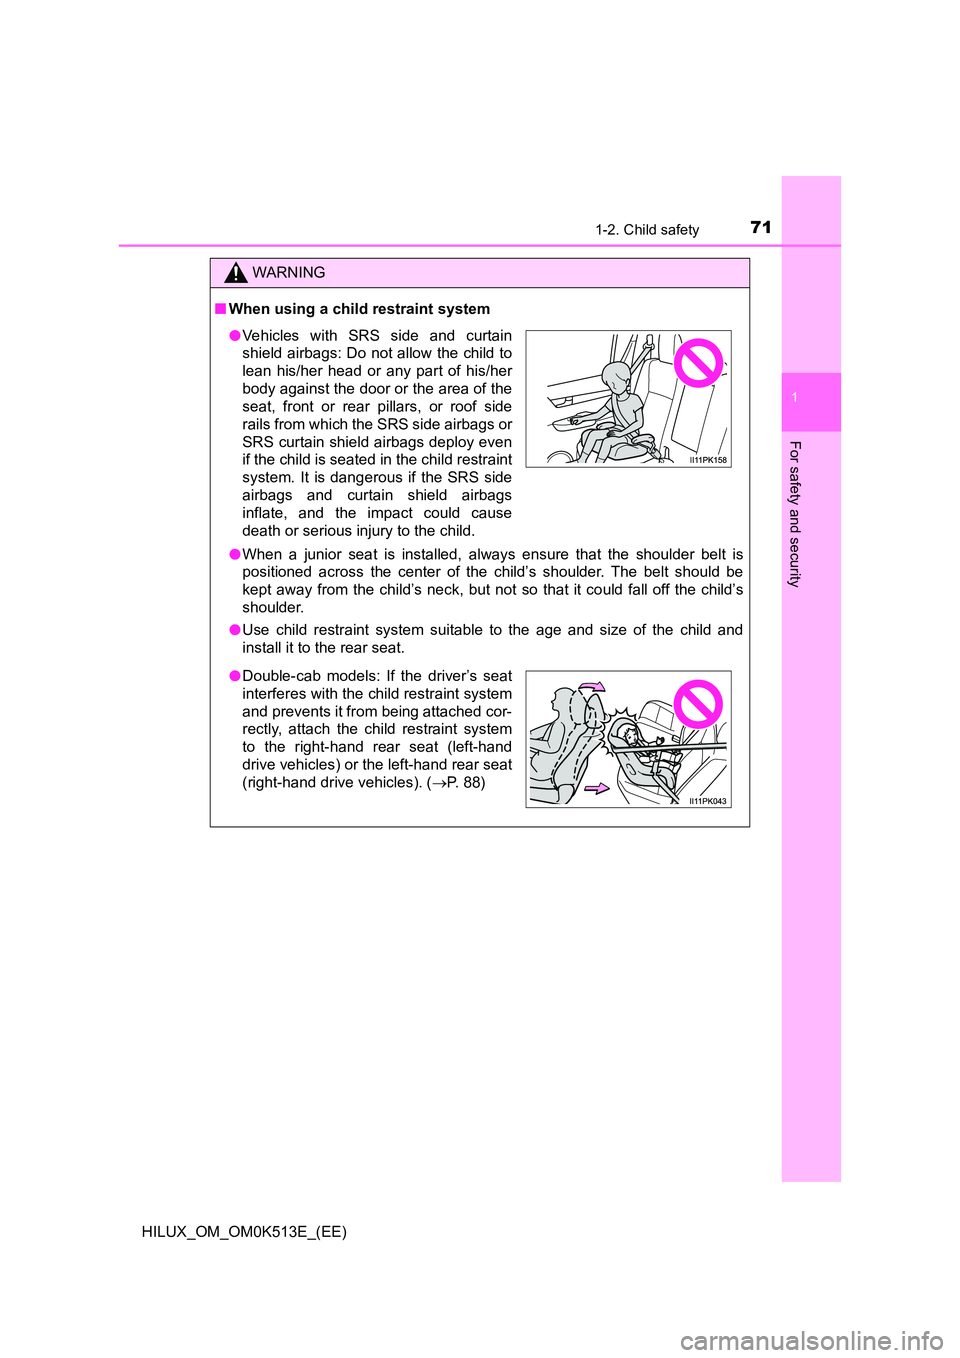 TOYOTA HILUX 2021  Owners Manual (in English) 711-2. Child safety
1
HILUX_OM_OM0K513E_(EE)
For safety and security
WARNING
�QWhen using a child restraint system 
�O When a junior seat is installed, always ensure that the shoulder belt is 
positio